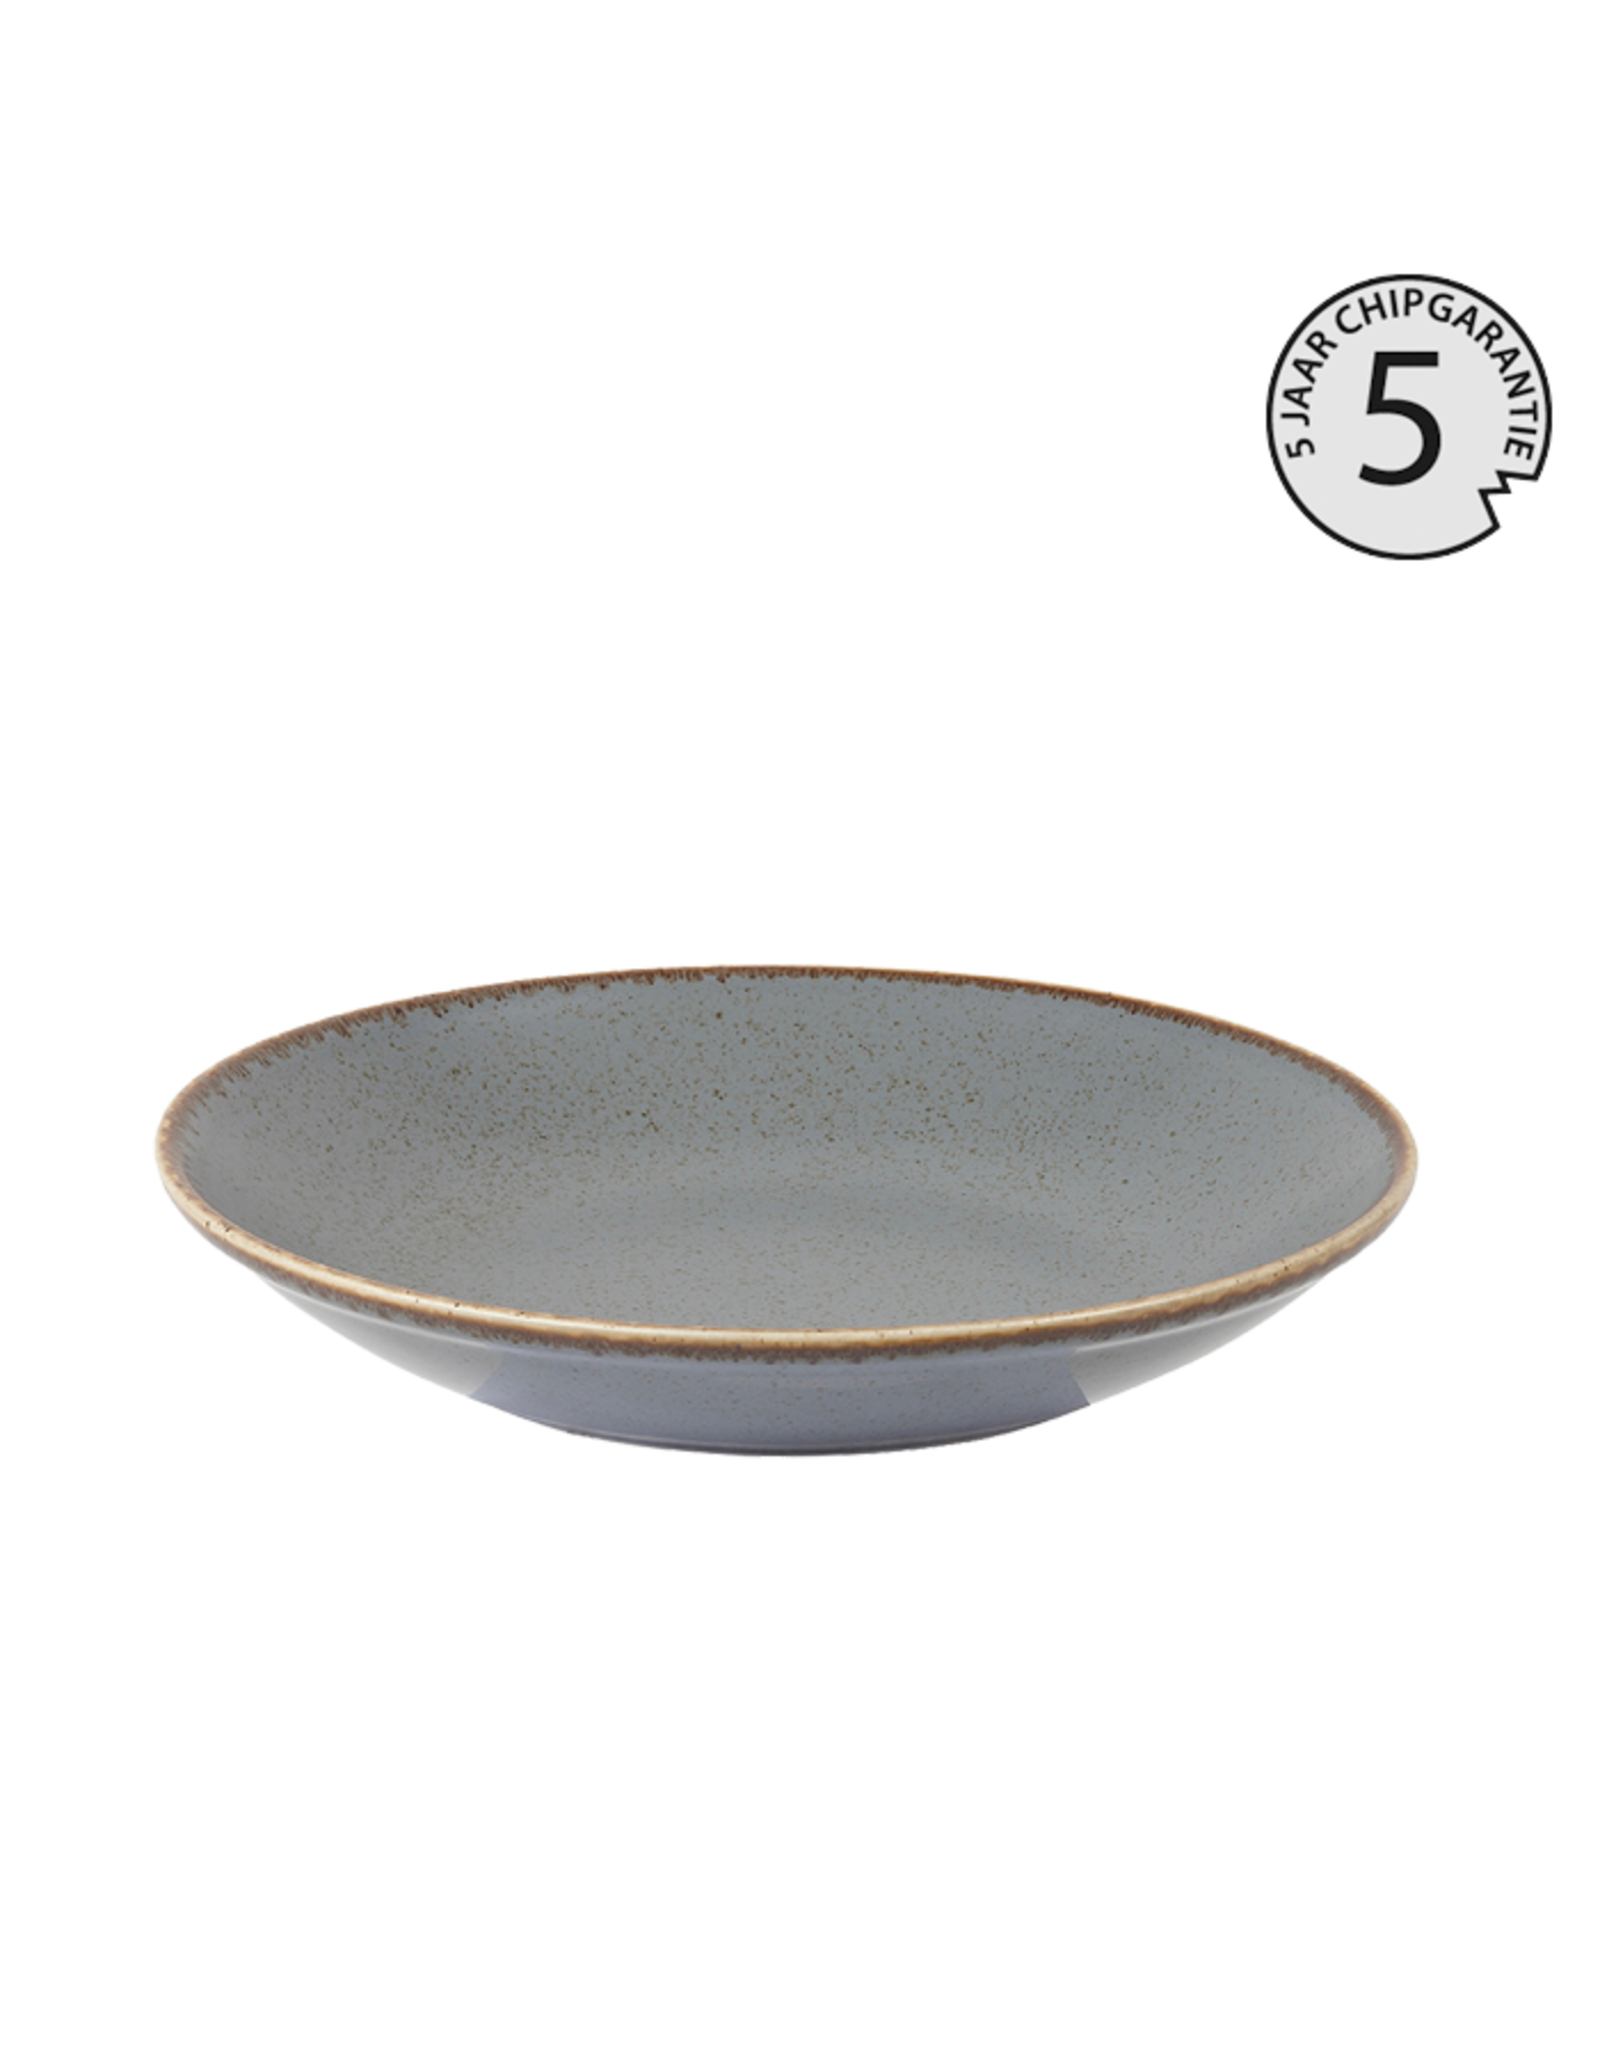 Stylepoint Coupe plate deep 30 cm Seasons Storm